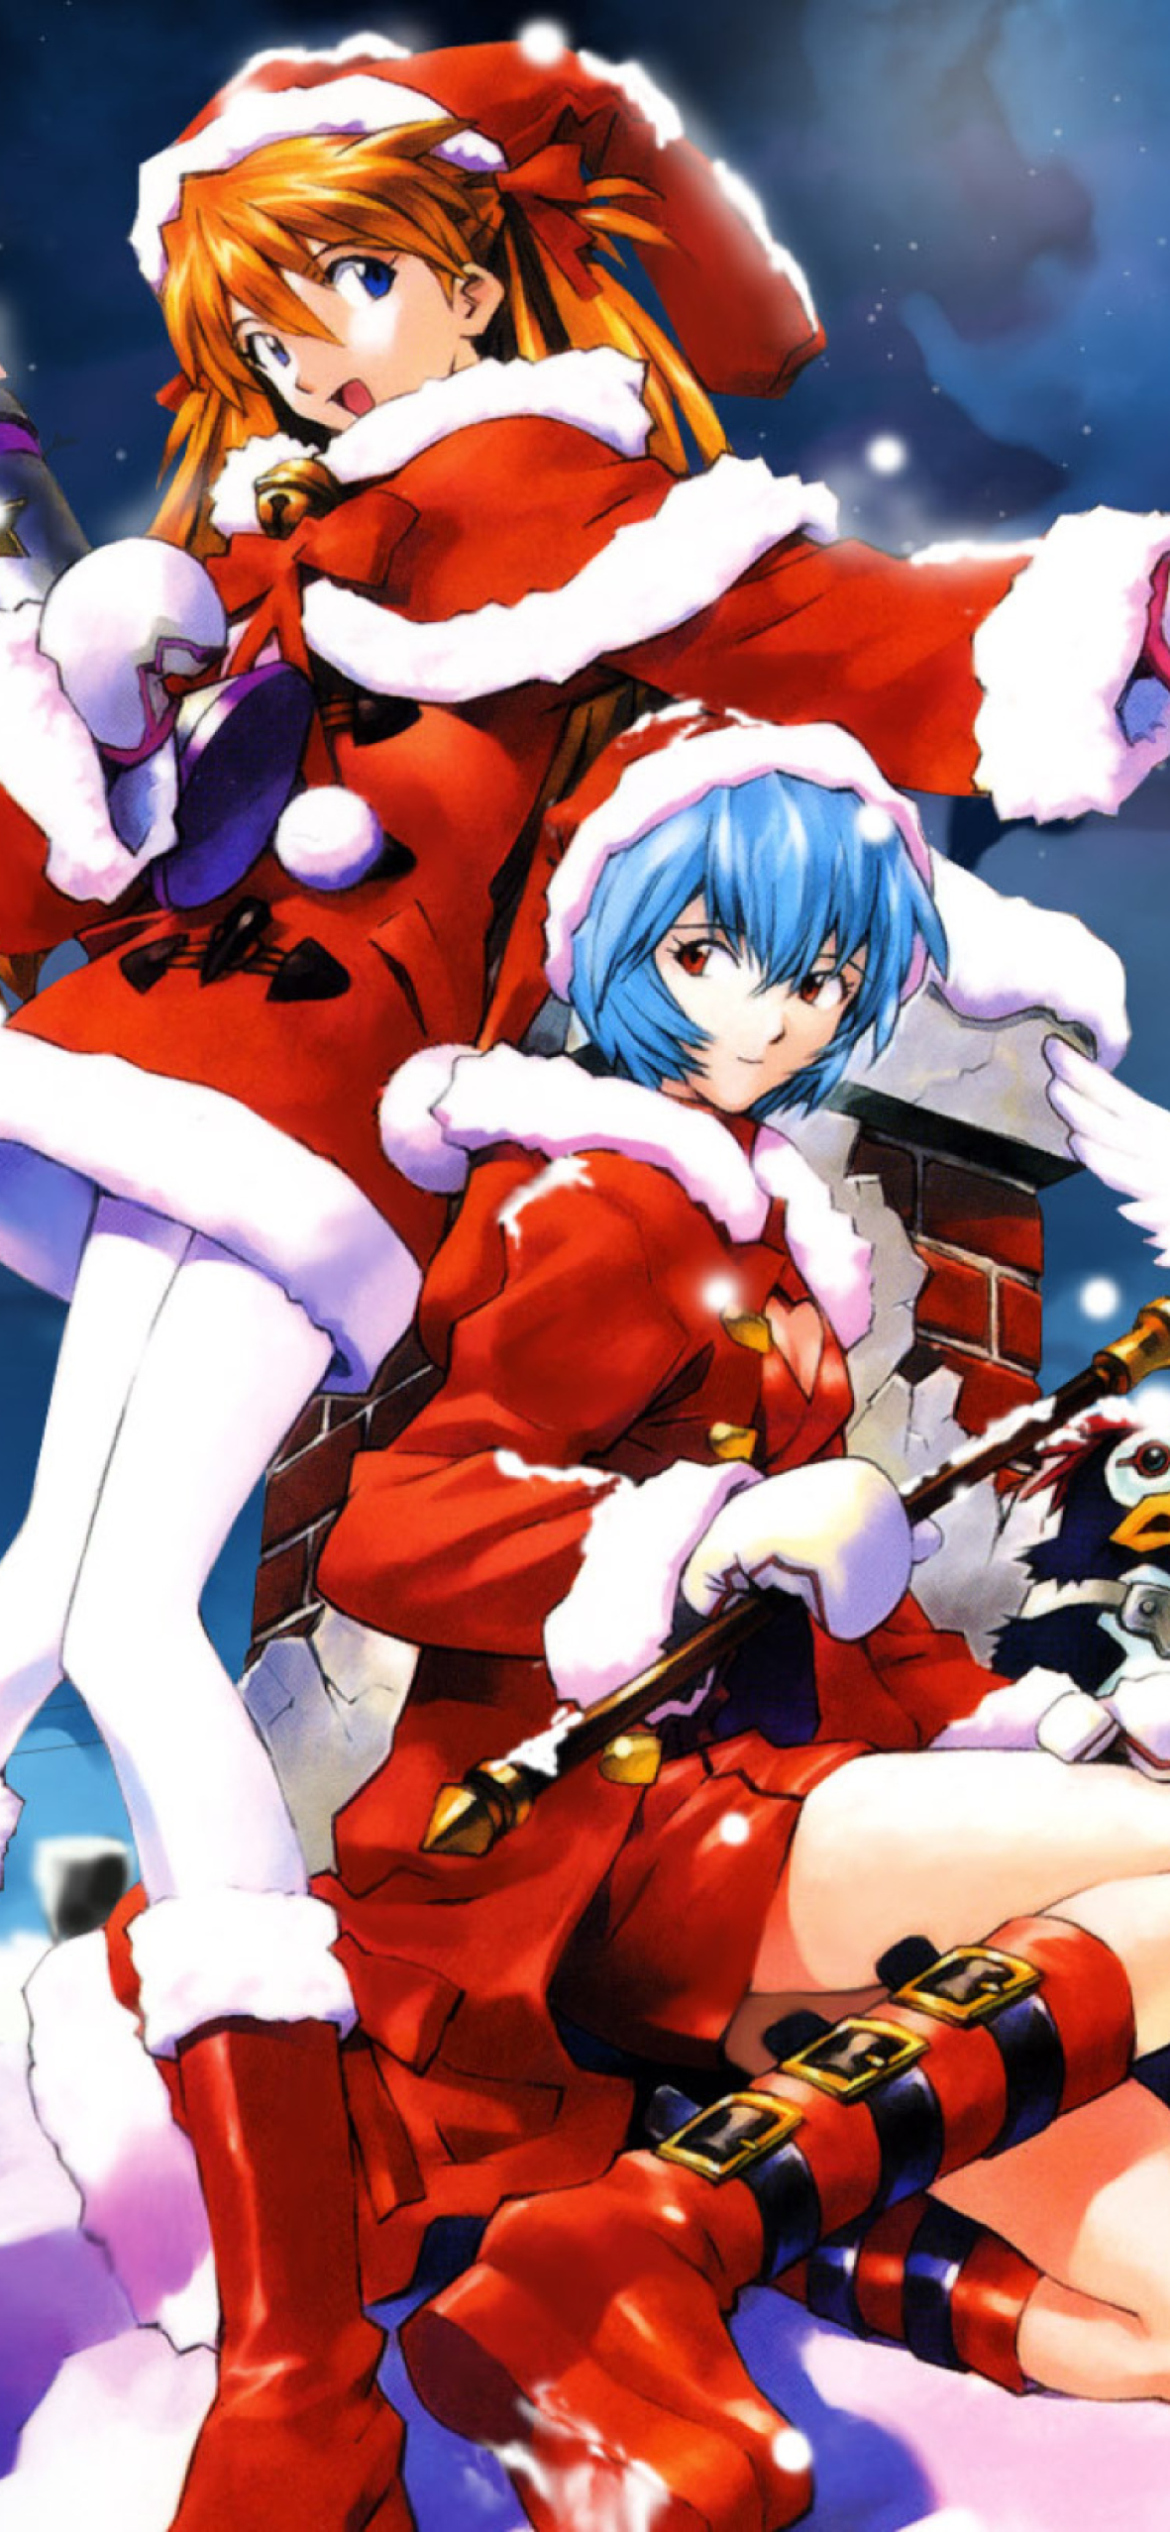 Christmas Anime iPhone Wallpapers - Wallpaper Cave